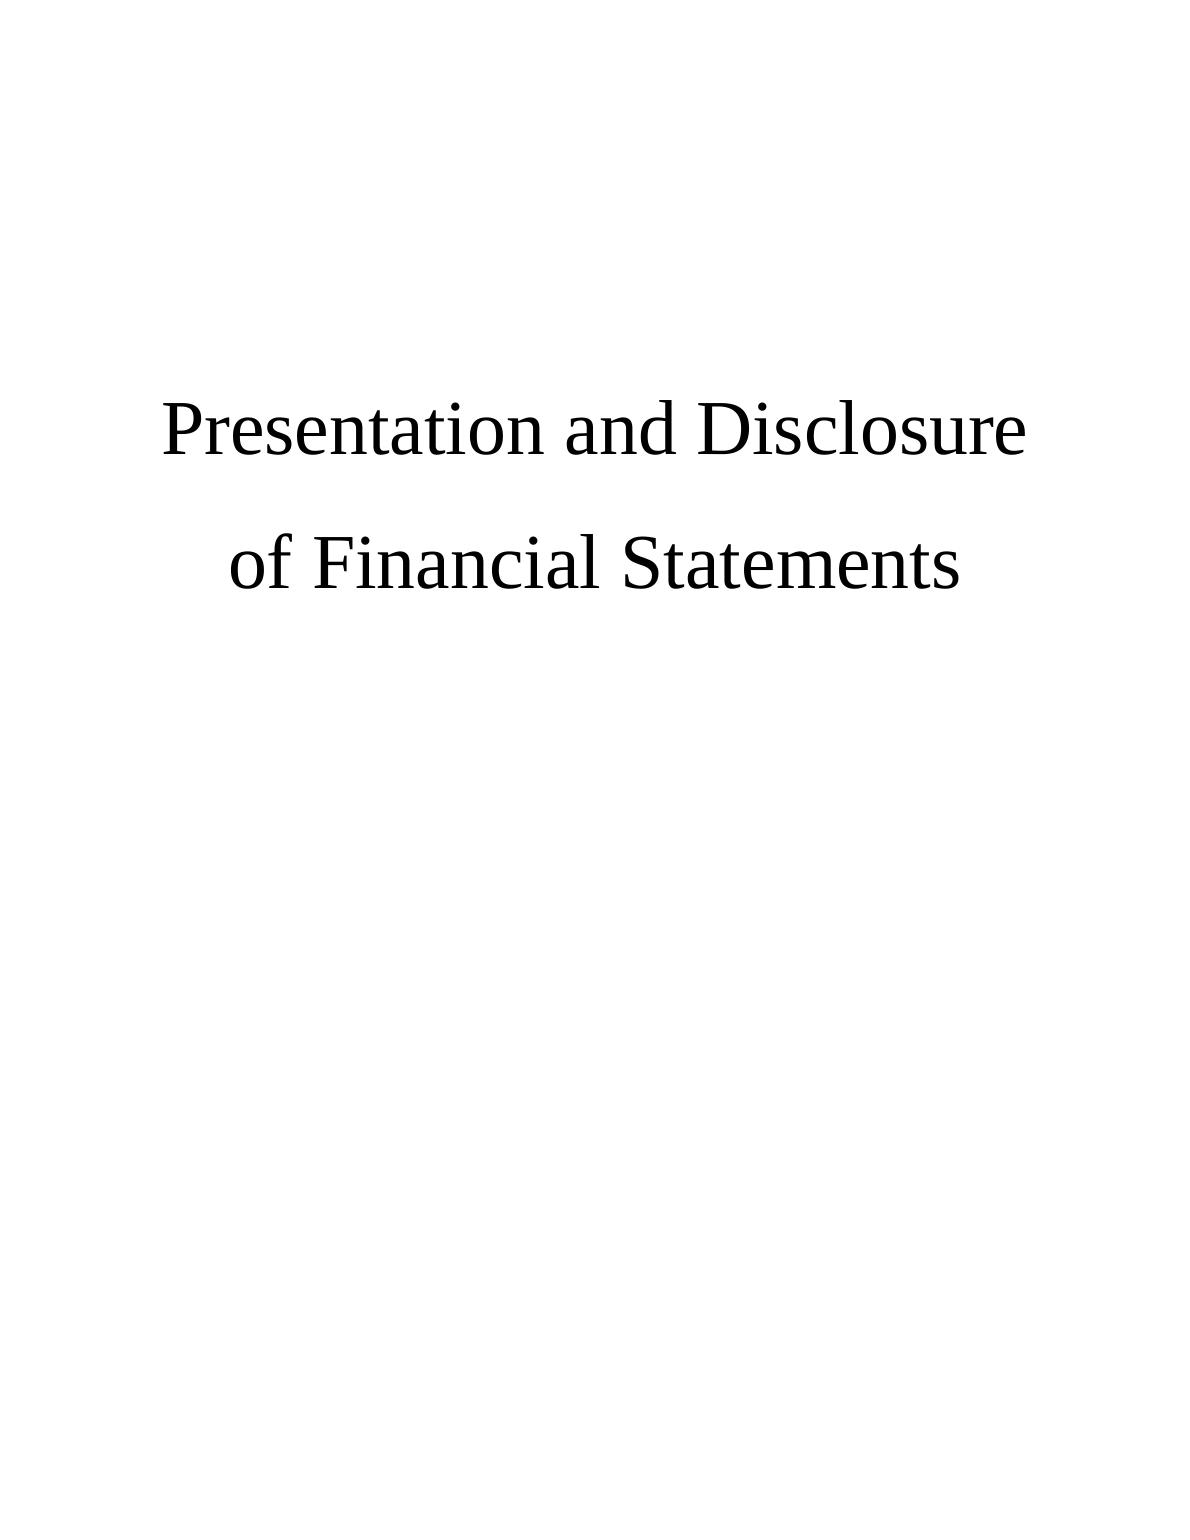 International Accounting Standards Board (IASB) Assignment_1